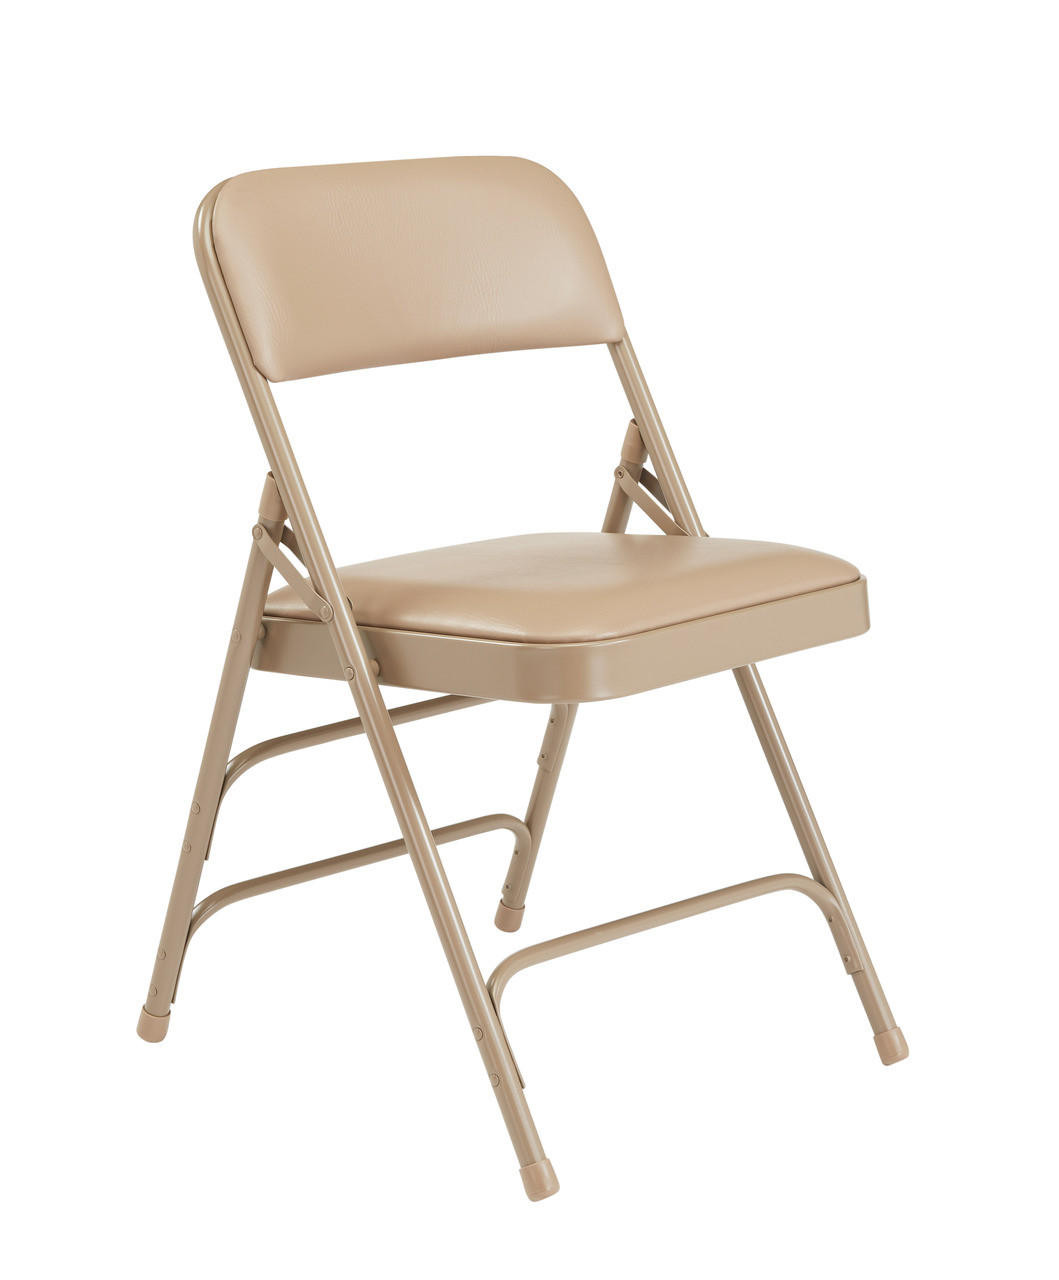 https://cdn11.bigcommerce.com/s-36yz7qwnyo/images/stencil/1280x1280/products/18005/51038/national-public-seating-nps-1300-series-premium-vinyl-upholstered-triple-brace-double-hinge-folding-chair-french-beige-pack-of-4__00792.1683112638.jpg?c=1